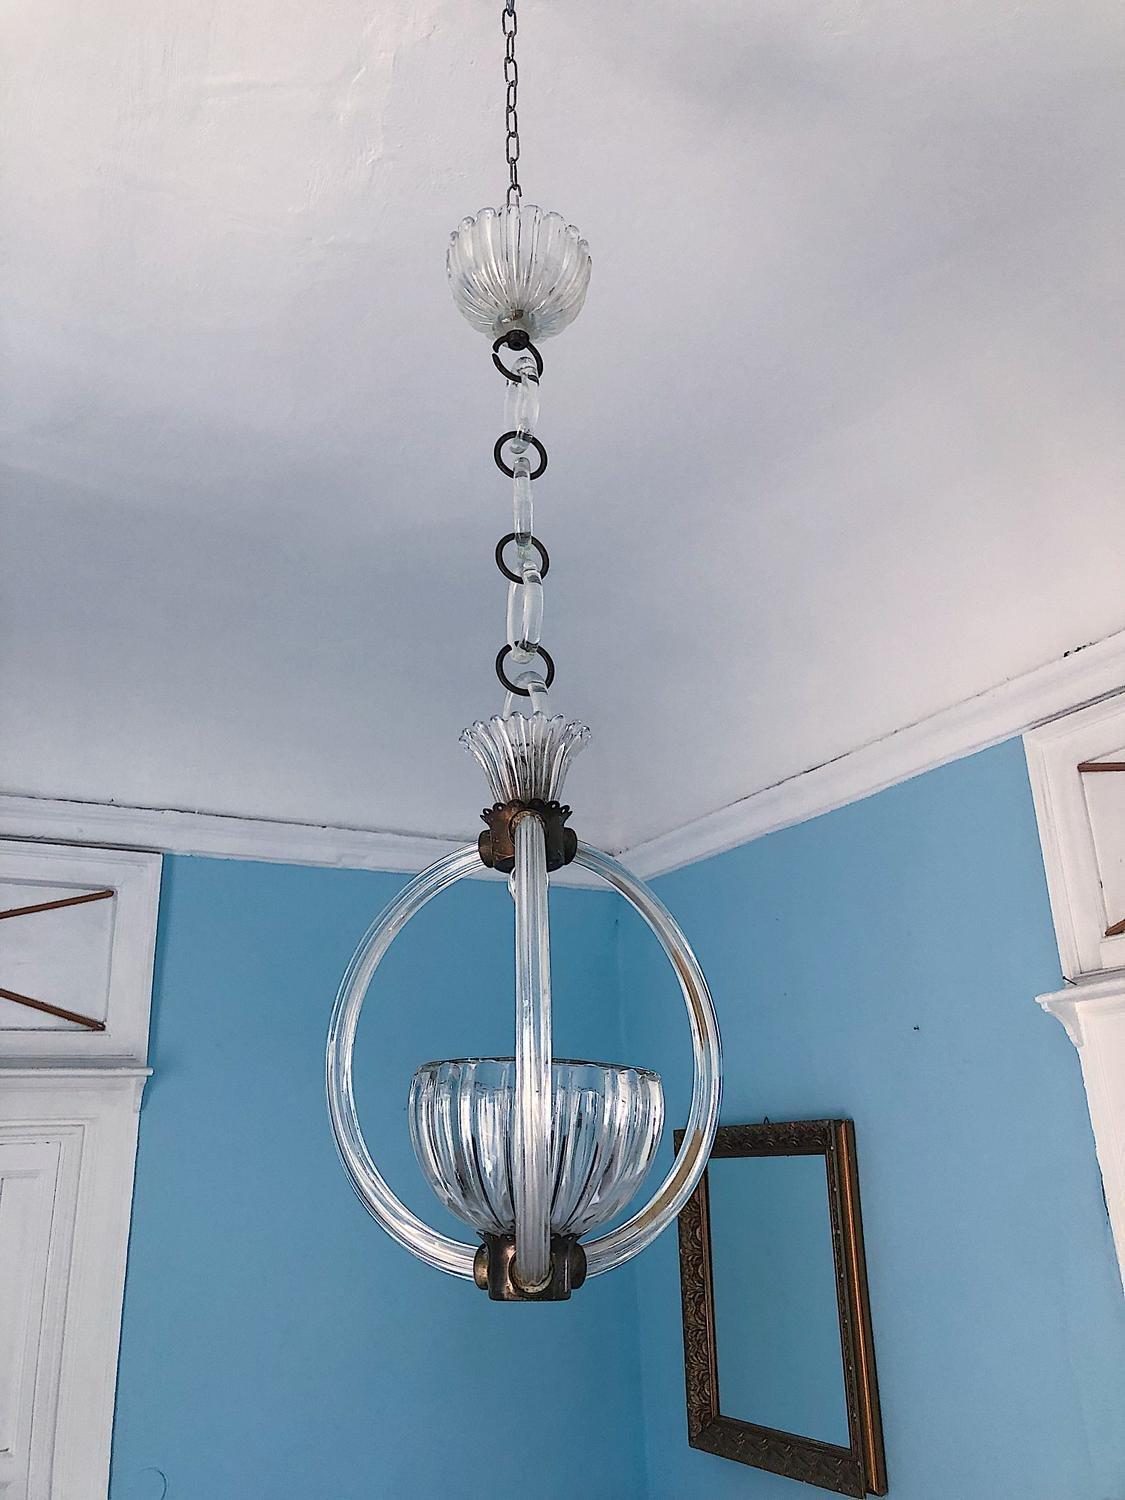 Fabulous 1930s chandelier by Barovier&Toso, Murano.
Note that the beautiful chain is also made of glass. The light has 1bulb.
Creator: Barovier & Toso, Murano
Dimensions: Height 90 cm Diameter: 35 cm
Materials and Techniques: Brass, Glass
Place of